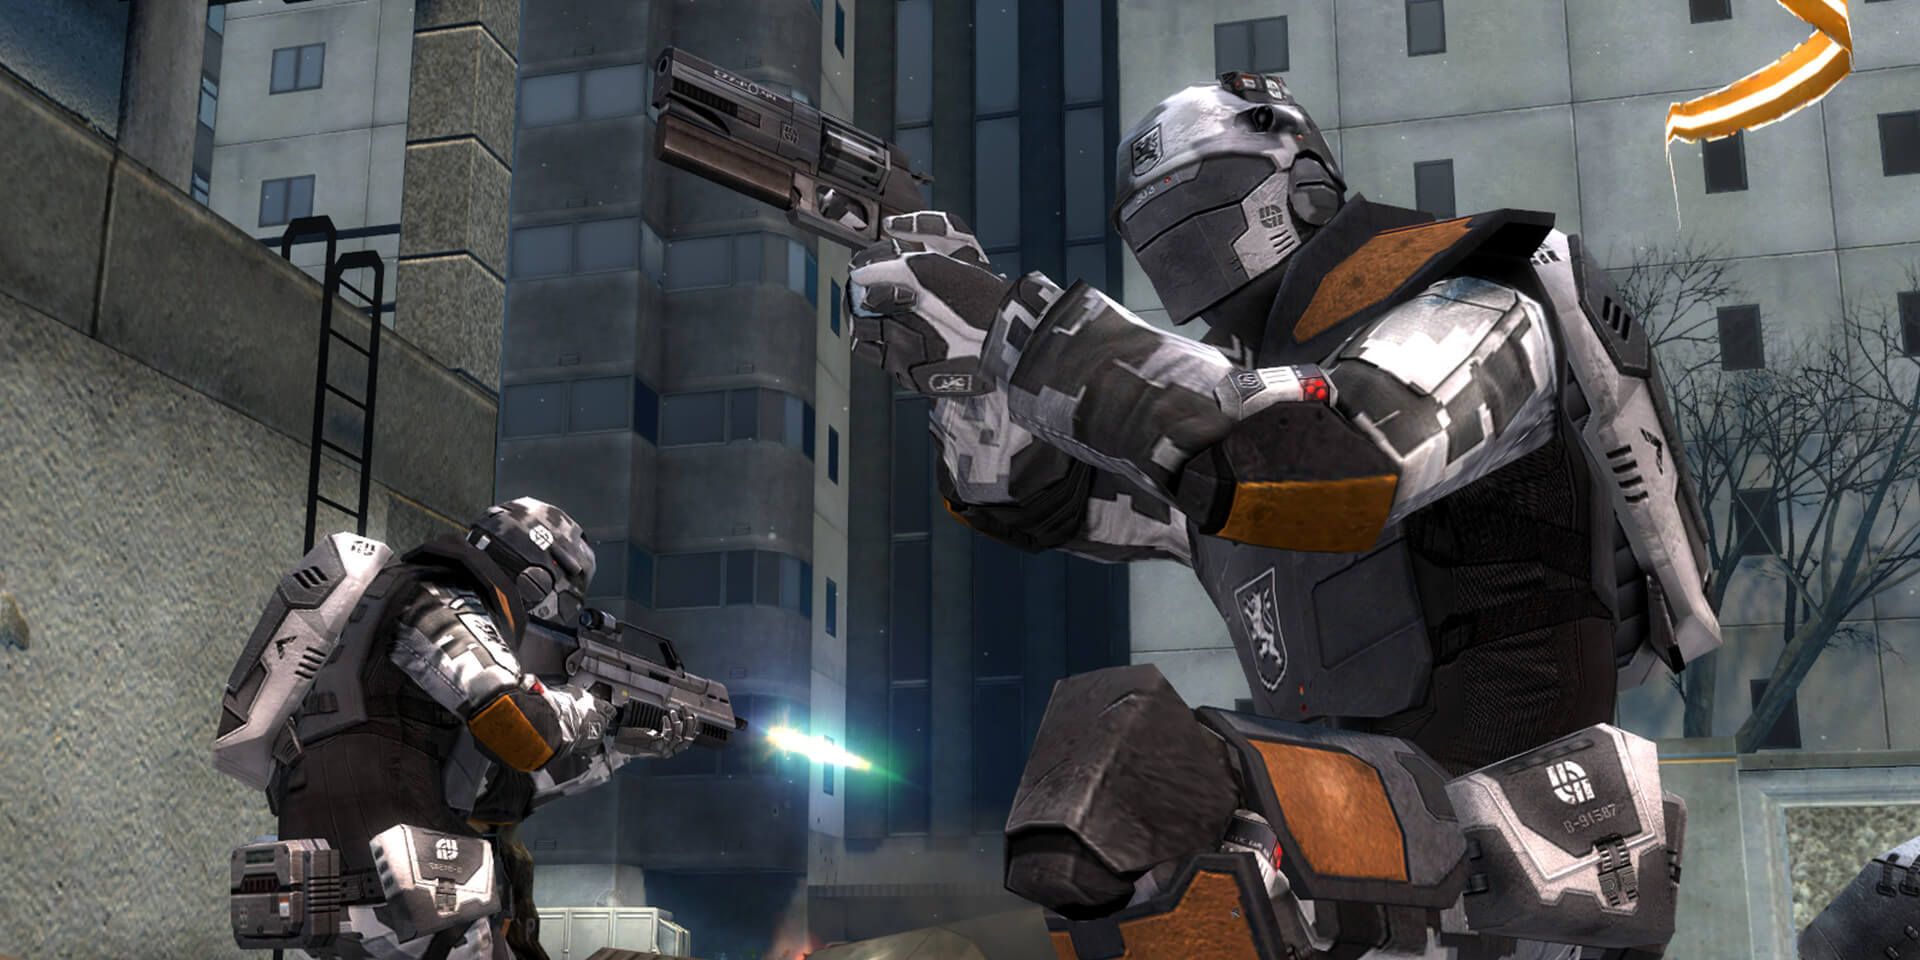 Soldiers in futuristic gear from the PC video game Battlefield 2142.